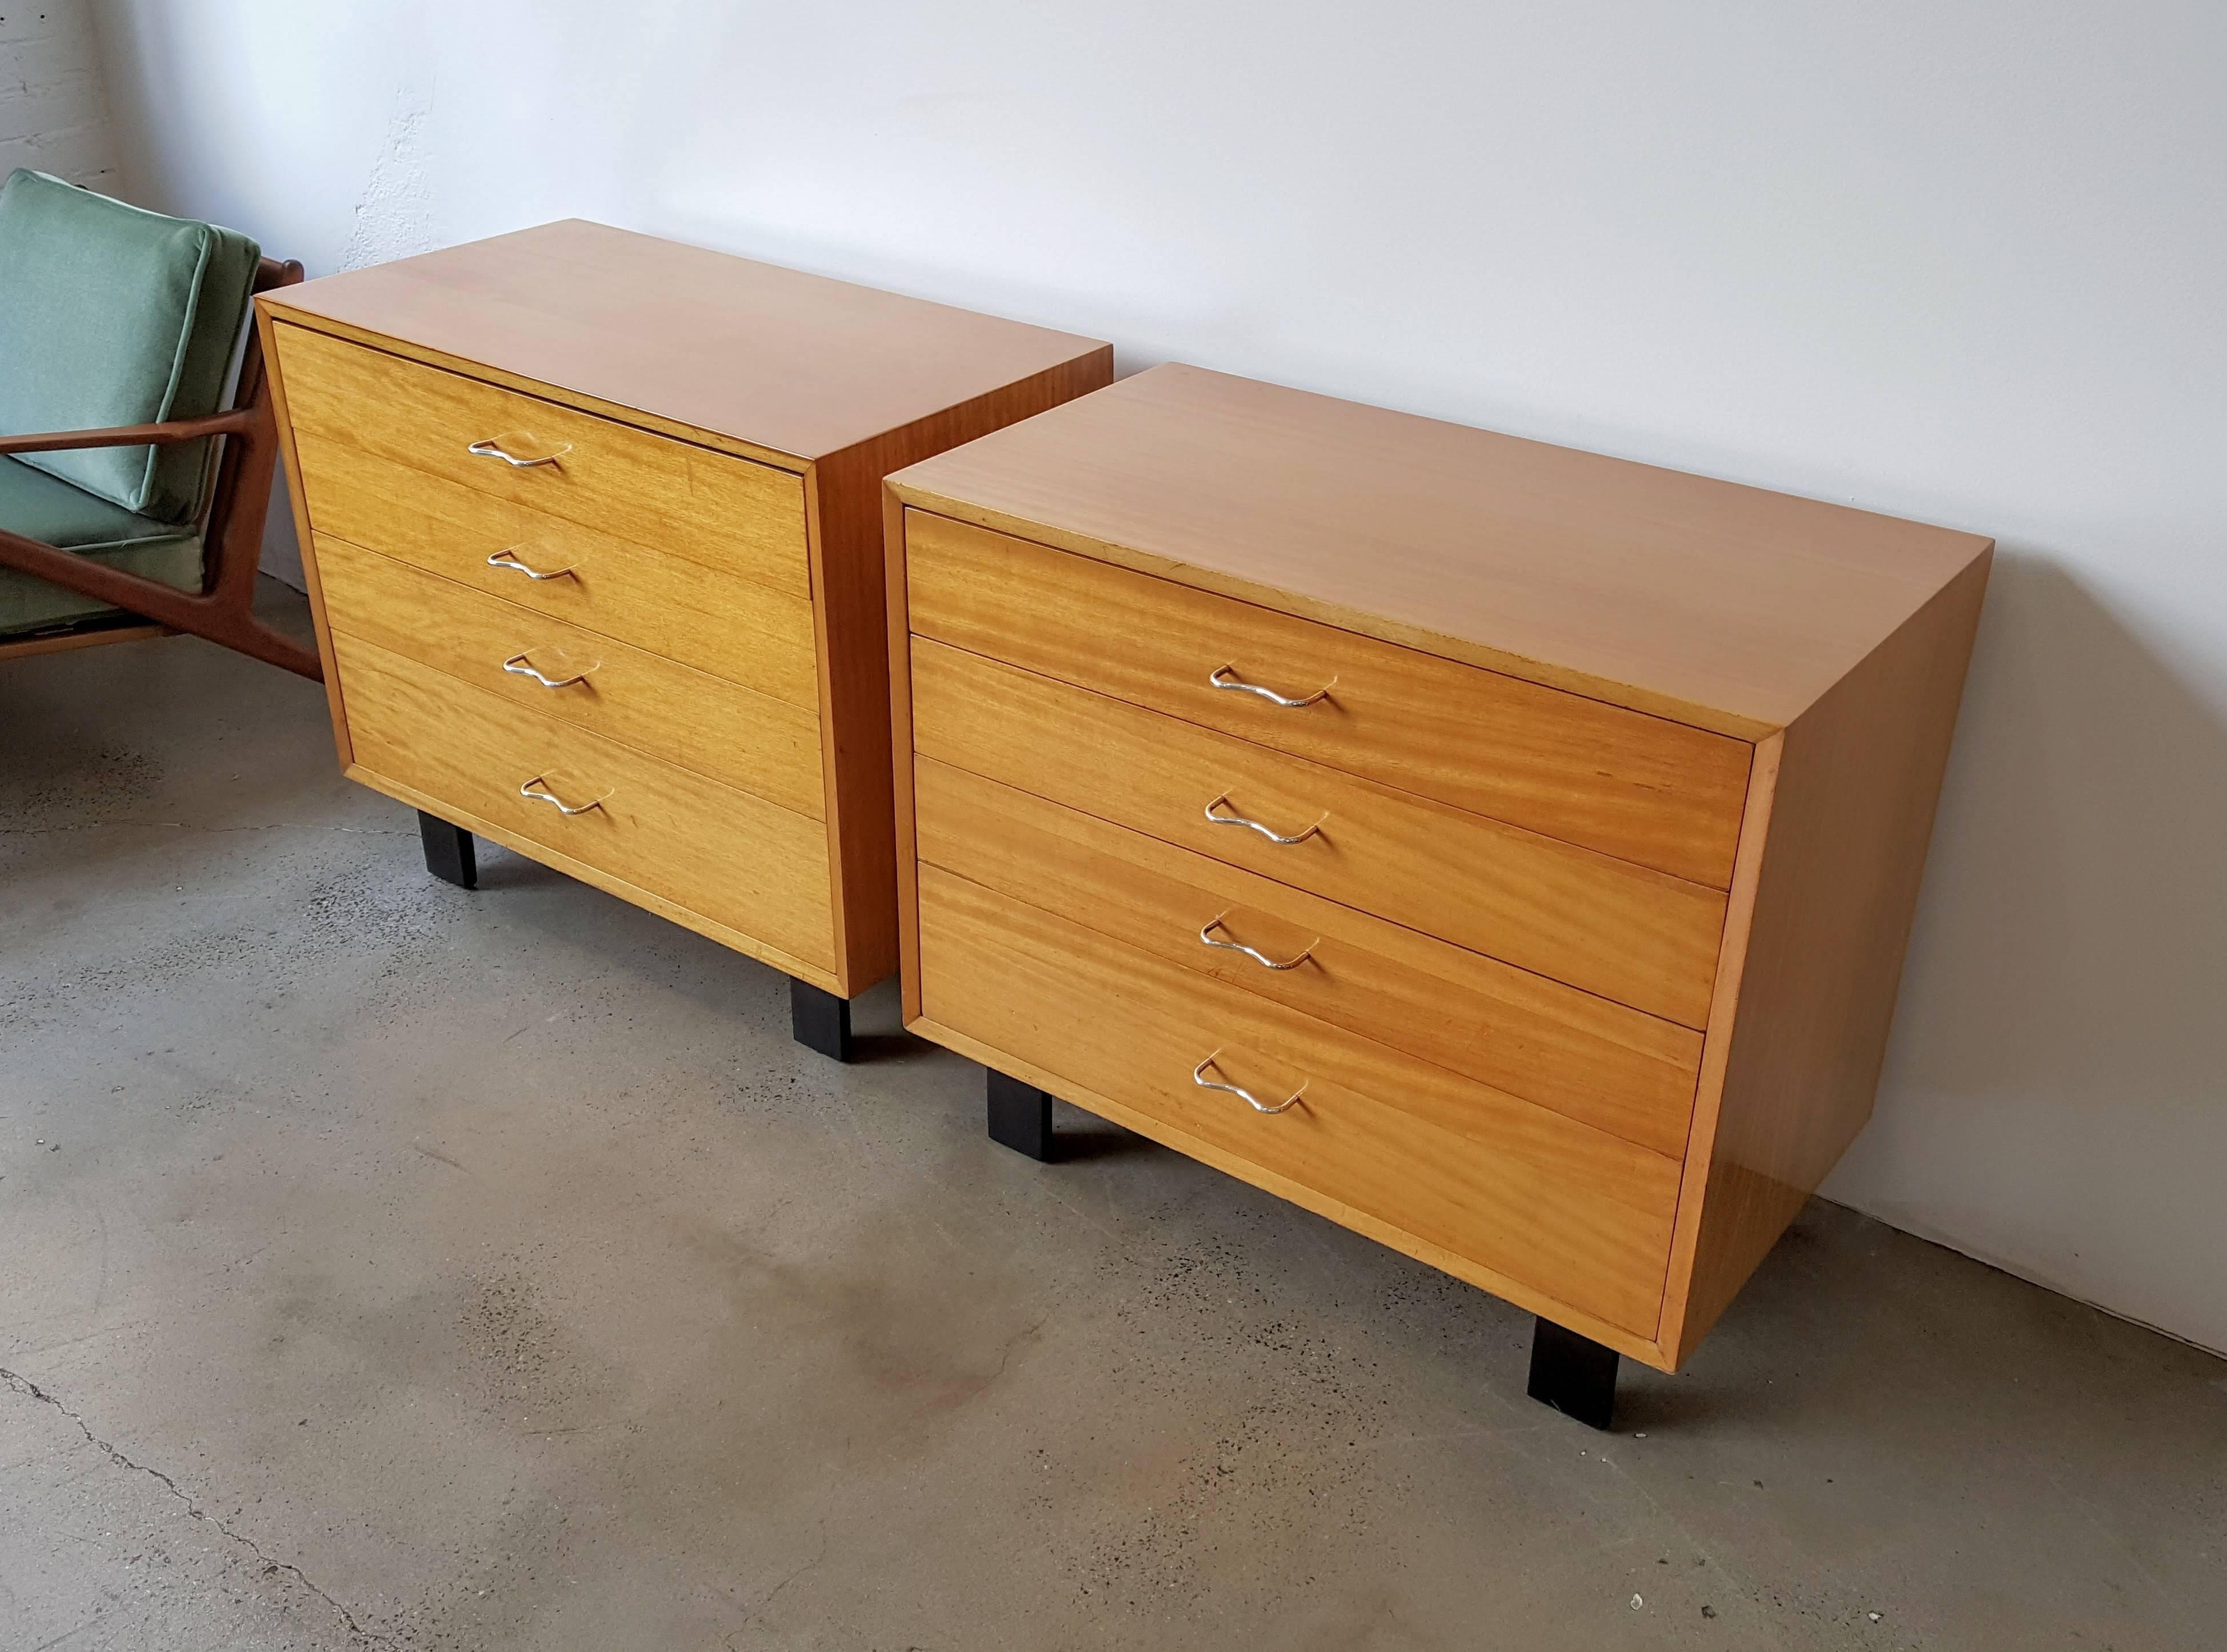 Pair of modern mahogany chests by George Nelson for Herman Miller, 1950s. Simple, elegant, and classic. The light mahogany finish with metal and ebonized accents was very popular in the "California Modern" movement of 1950s and used by